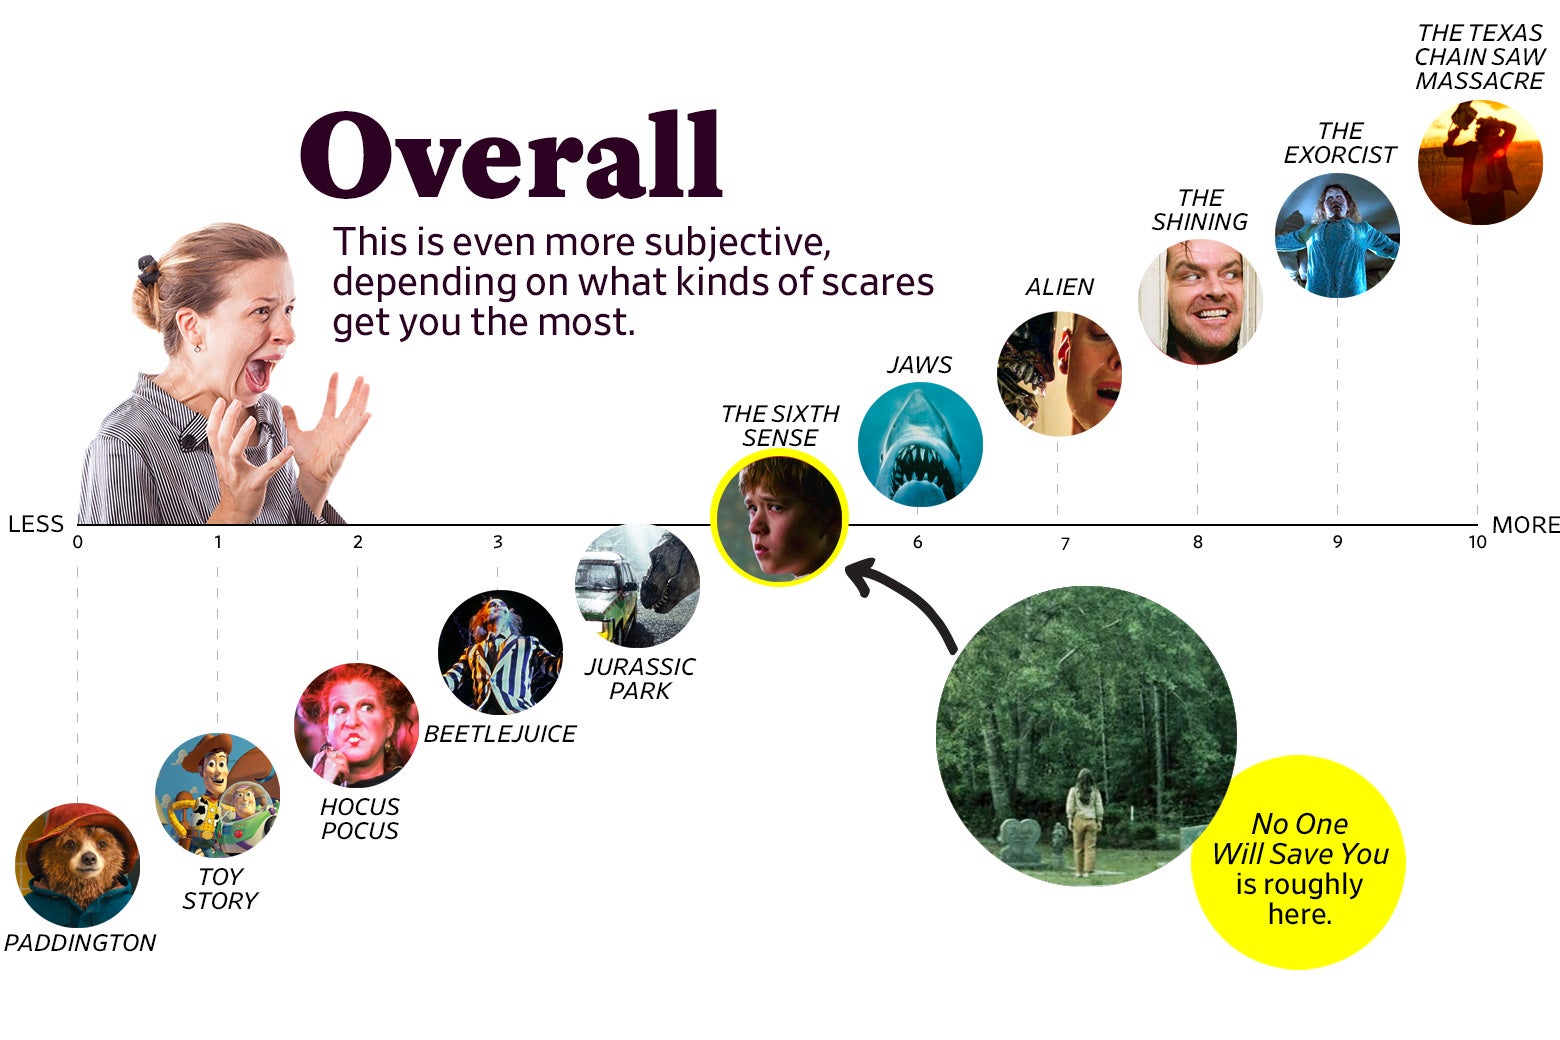 A chart titled “Overall: This is even more subjective, depending on what kinds of scares get you the most” shows that No One Will Save You ranks a 5 overall, roughly the same as The Sixth Sense. The scale ranges from Paddington (0) to The Texas Chain Saw Massacre, 1974 (10).